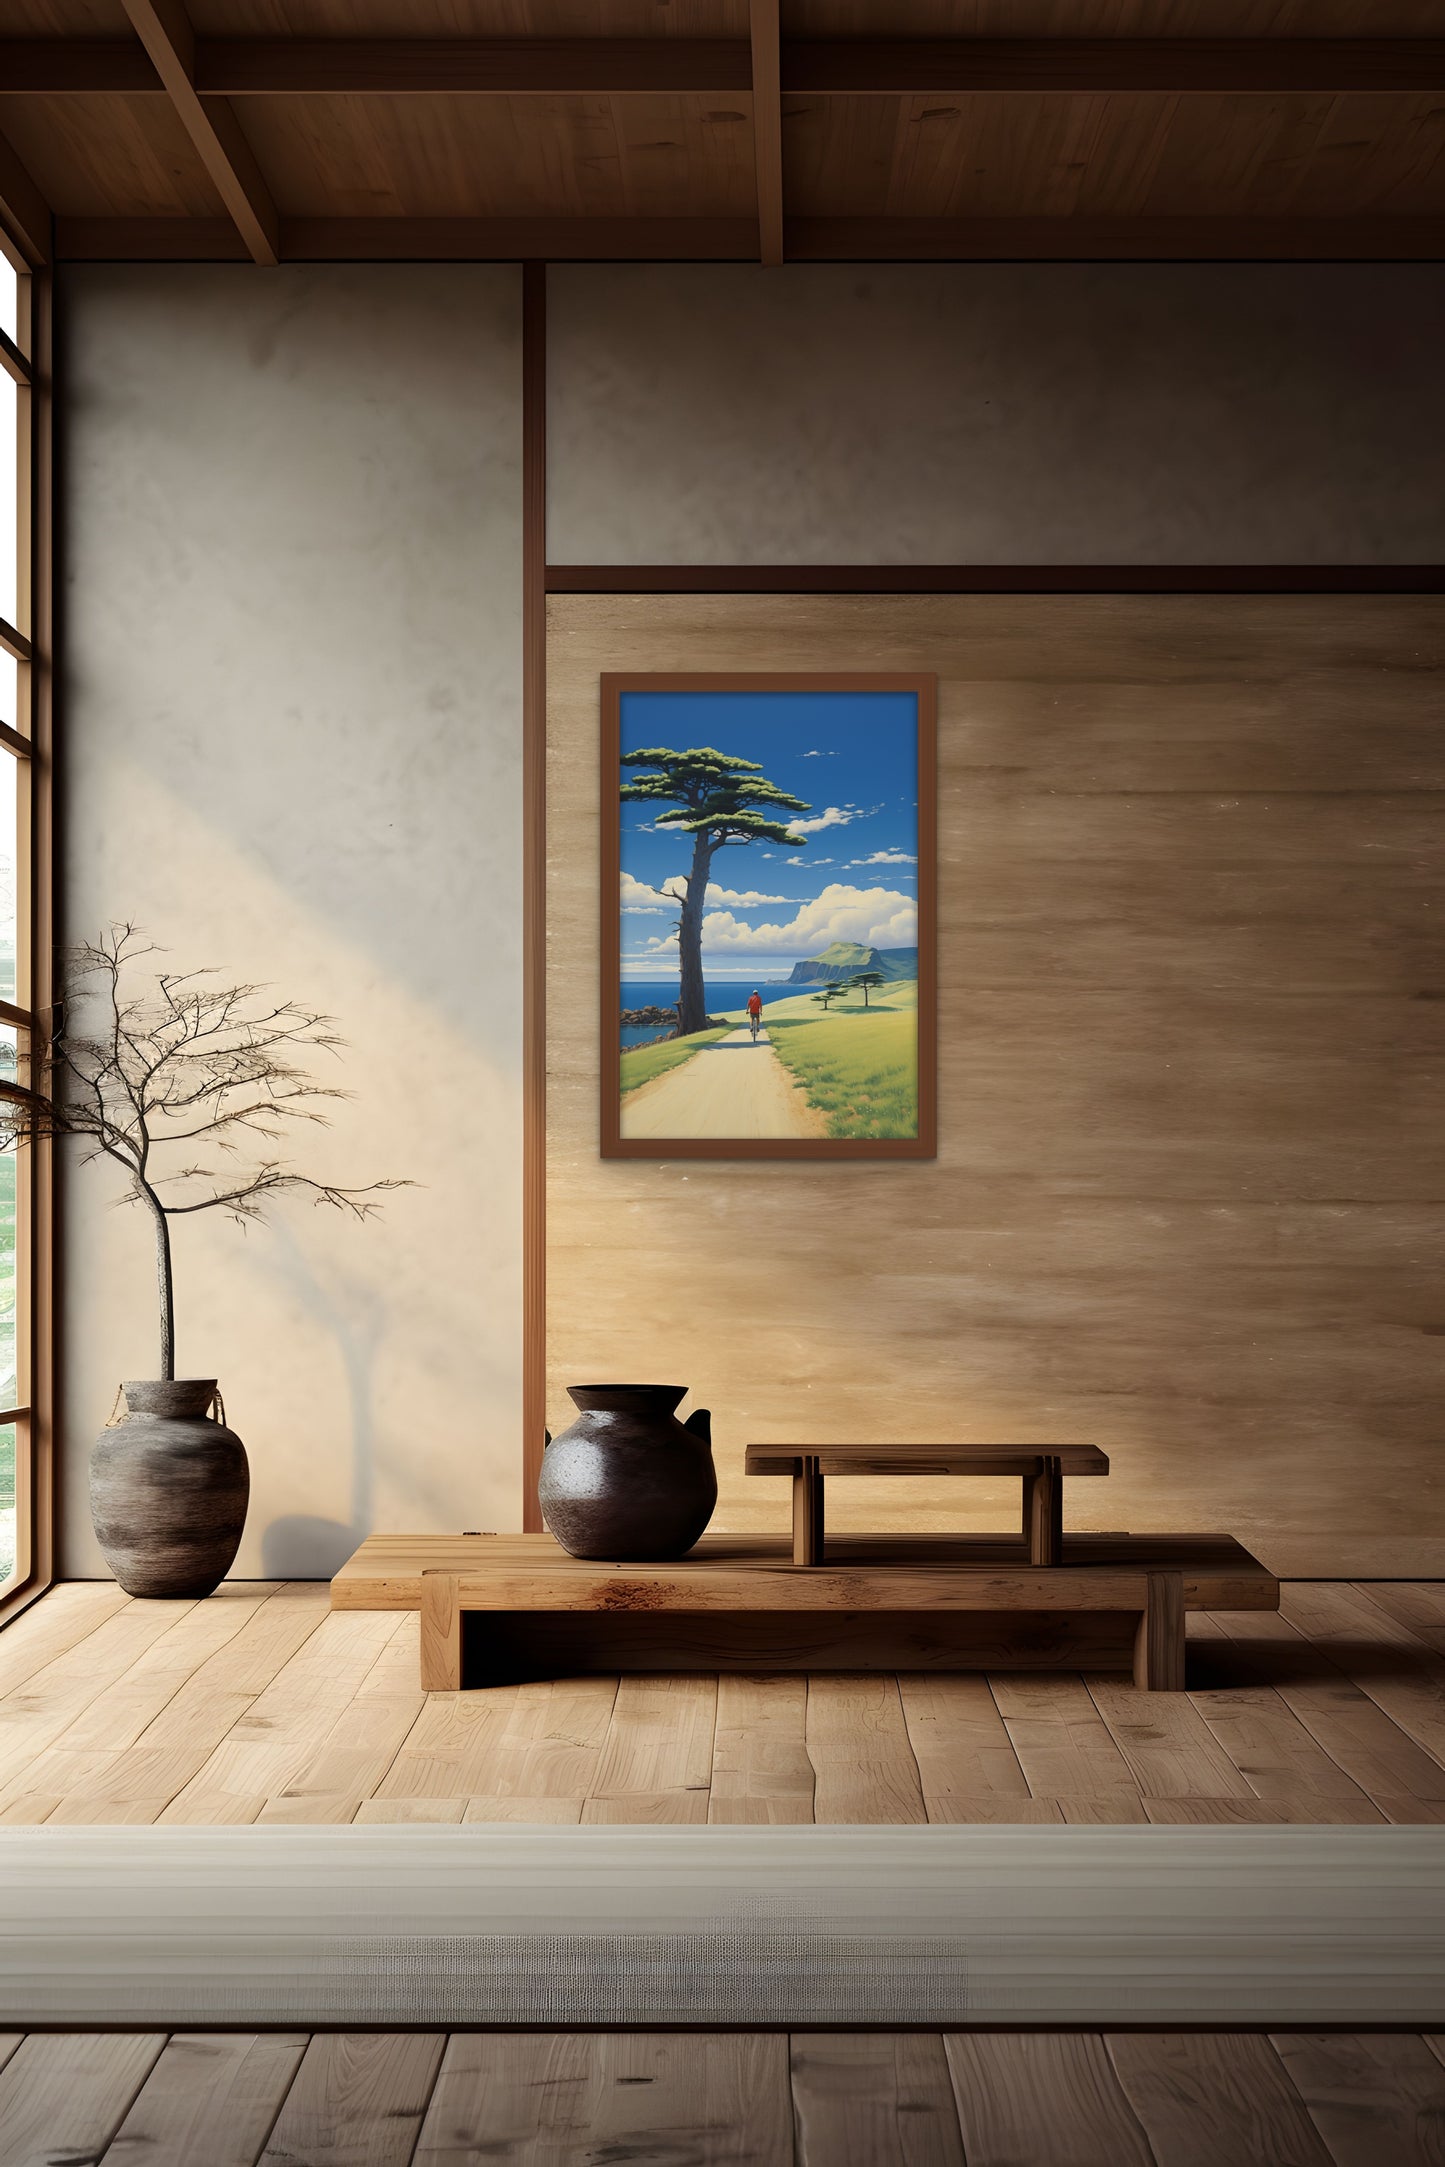 Minimalist Japanese-style room with a painting on the wall, wooden bench, and decorative pots.